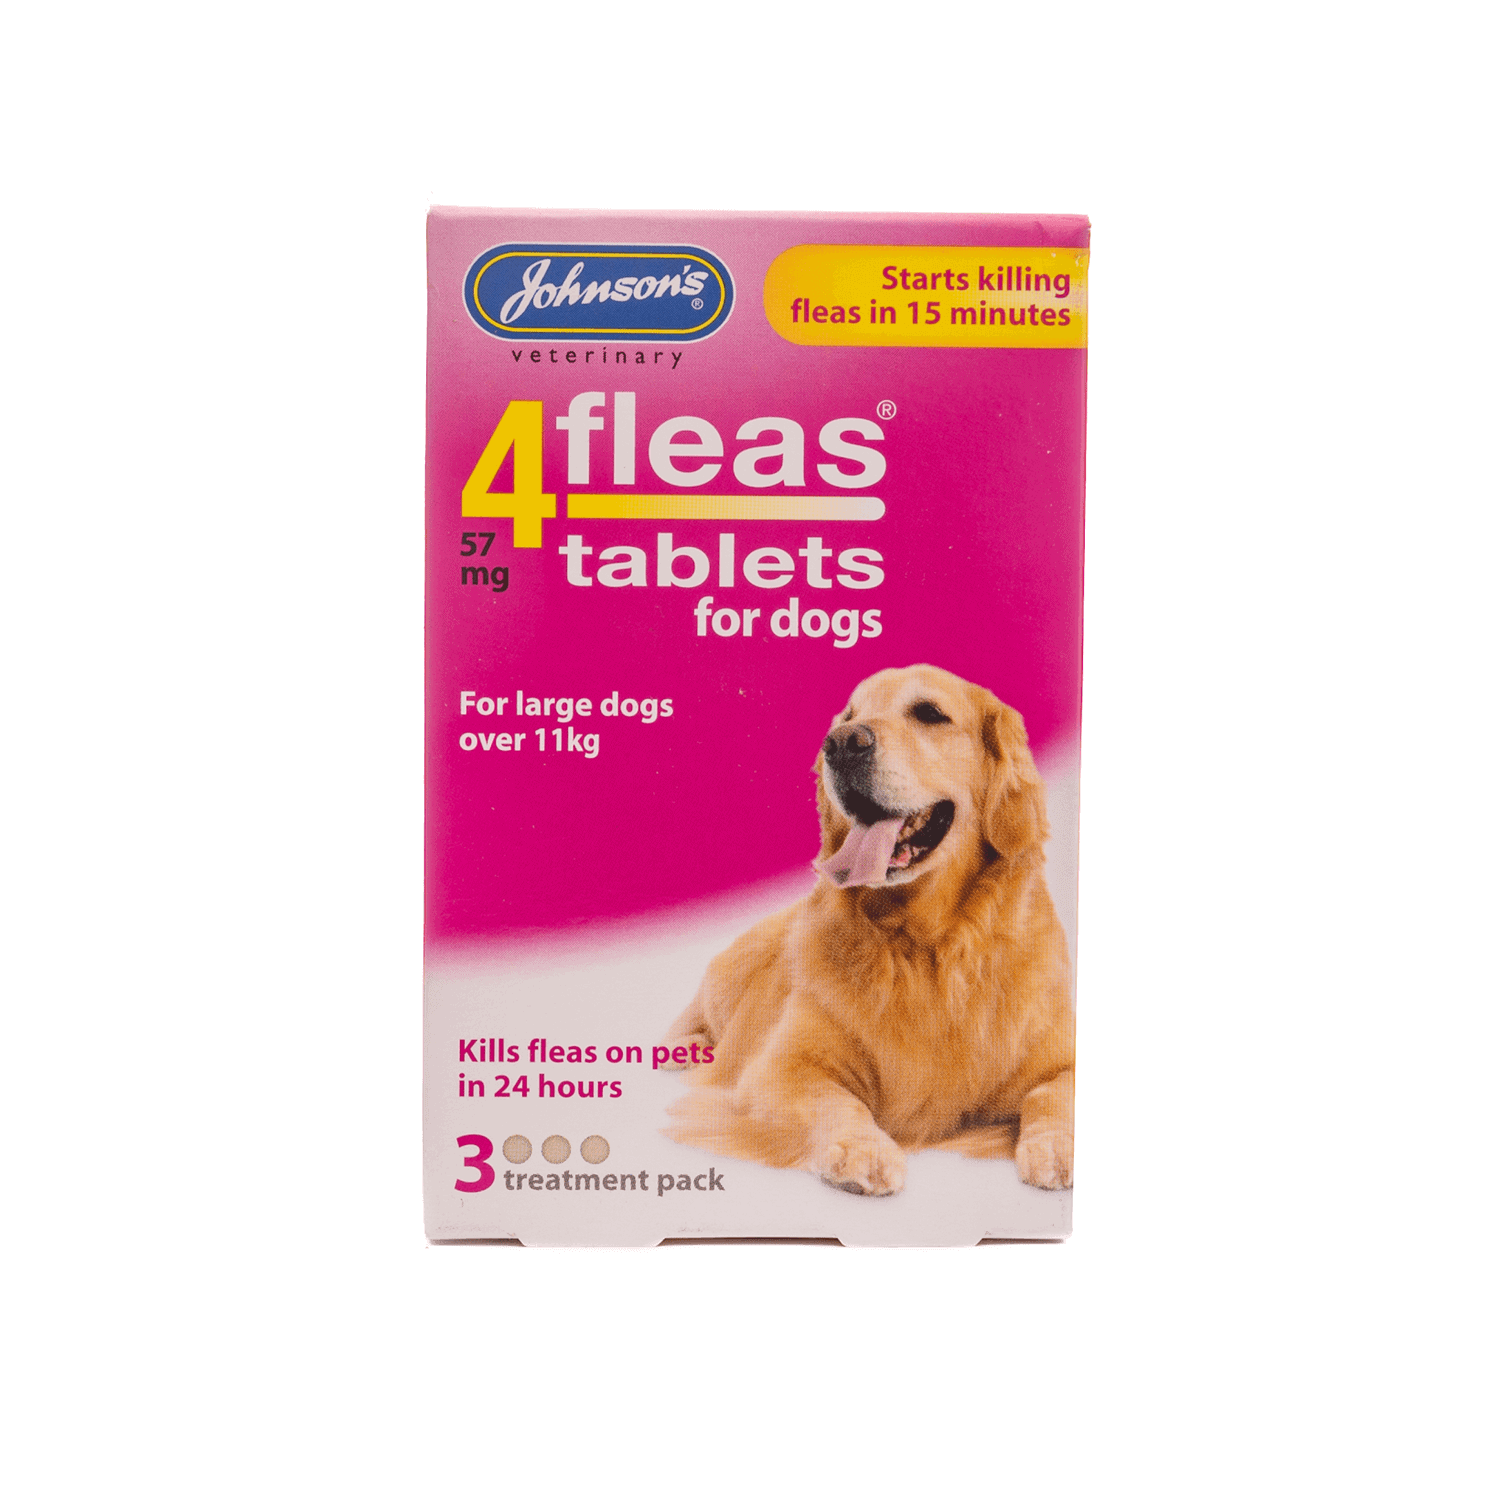 4fleas tablets for dogs